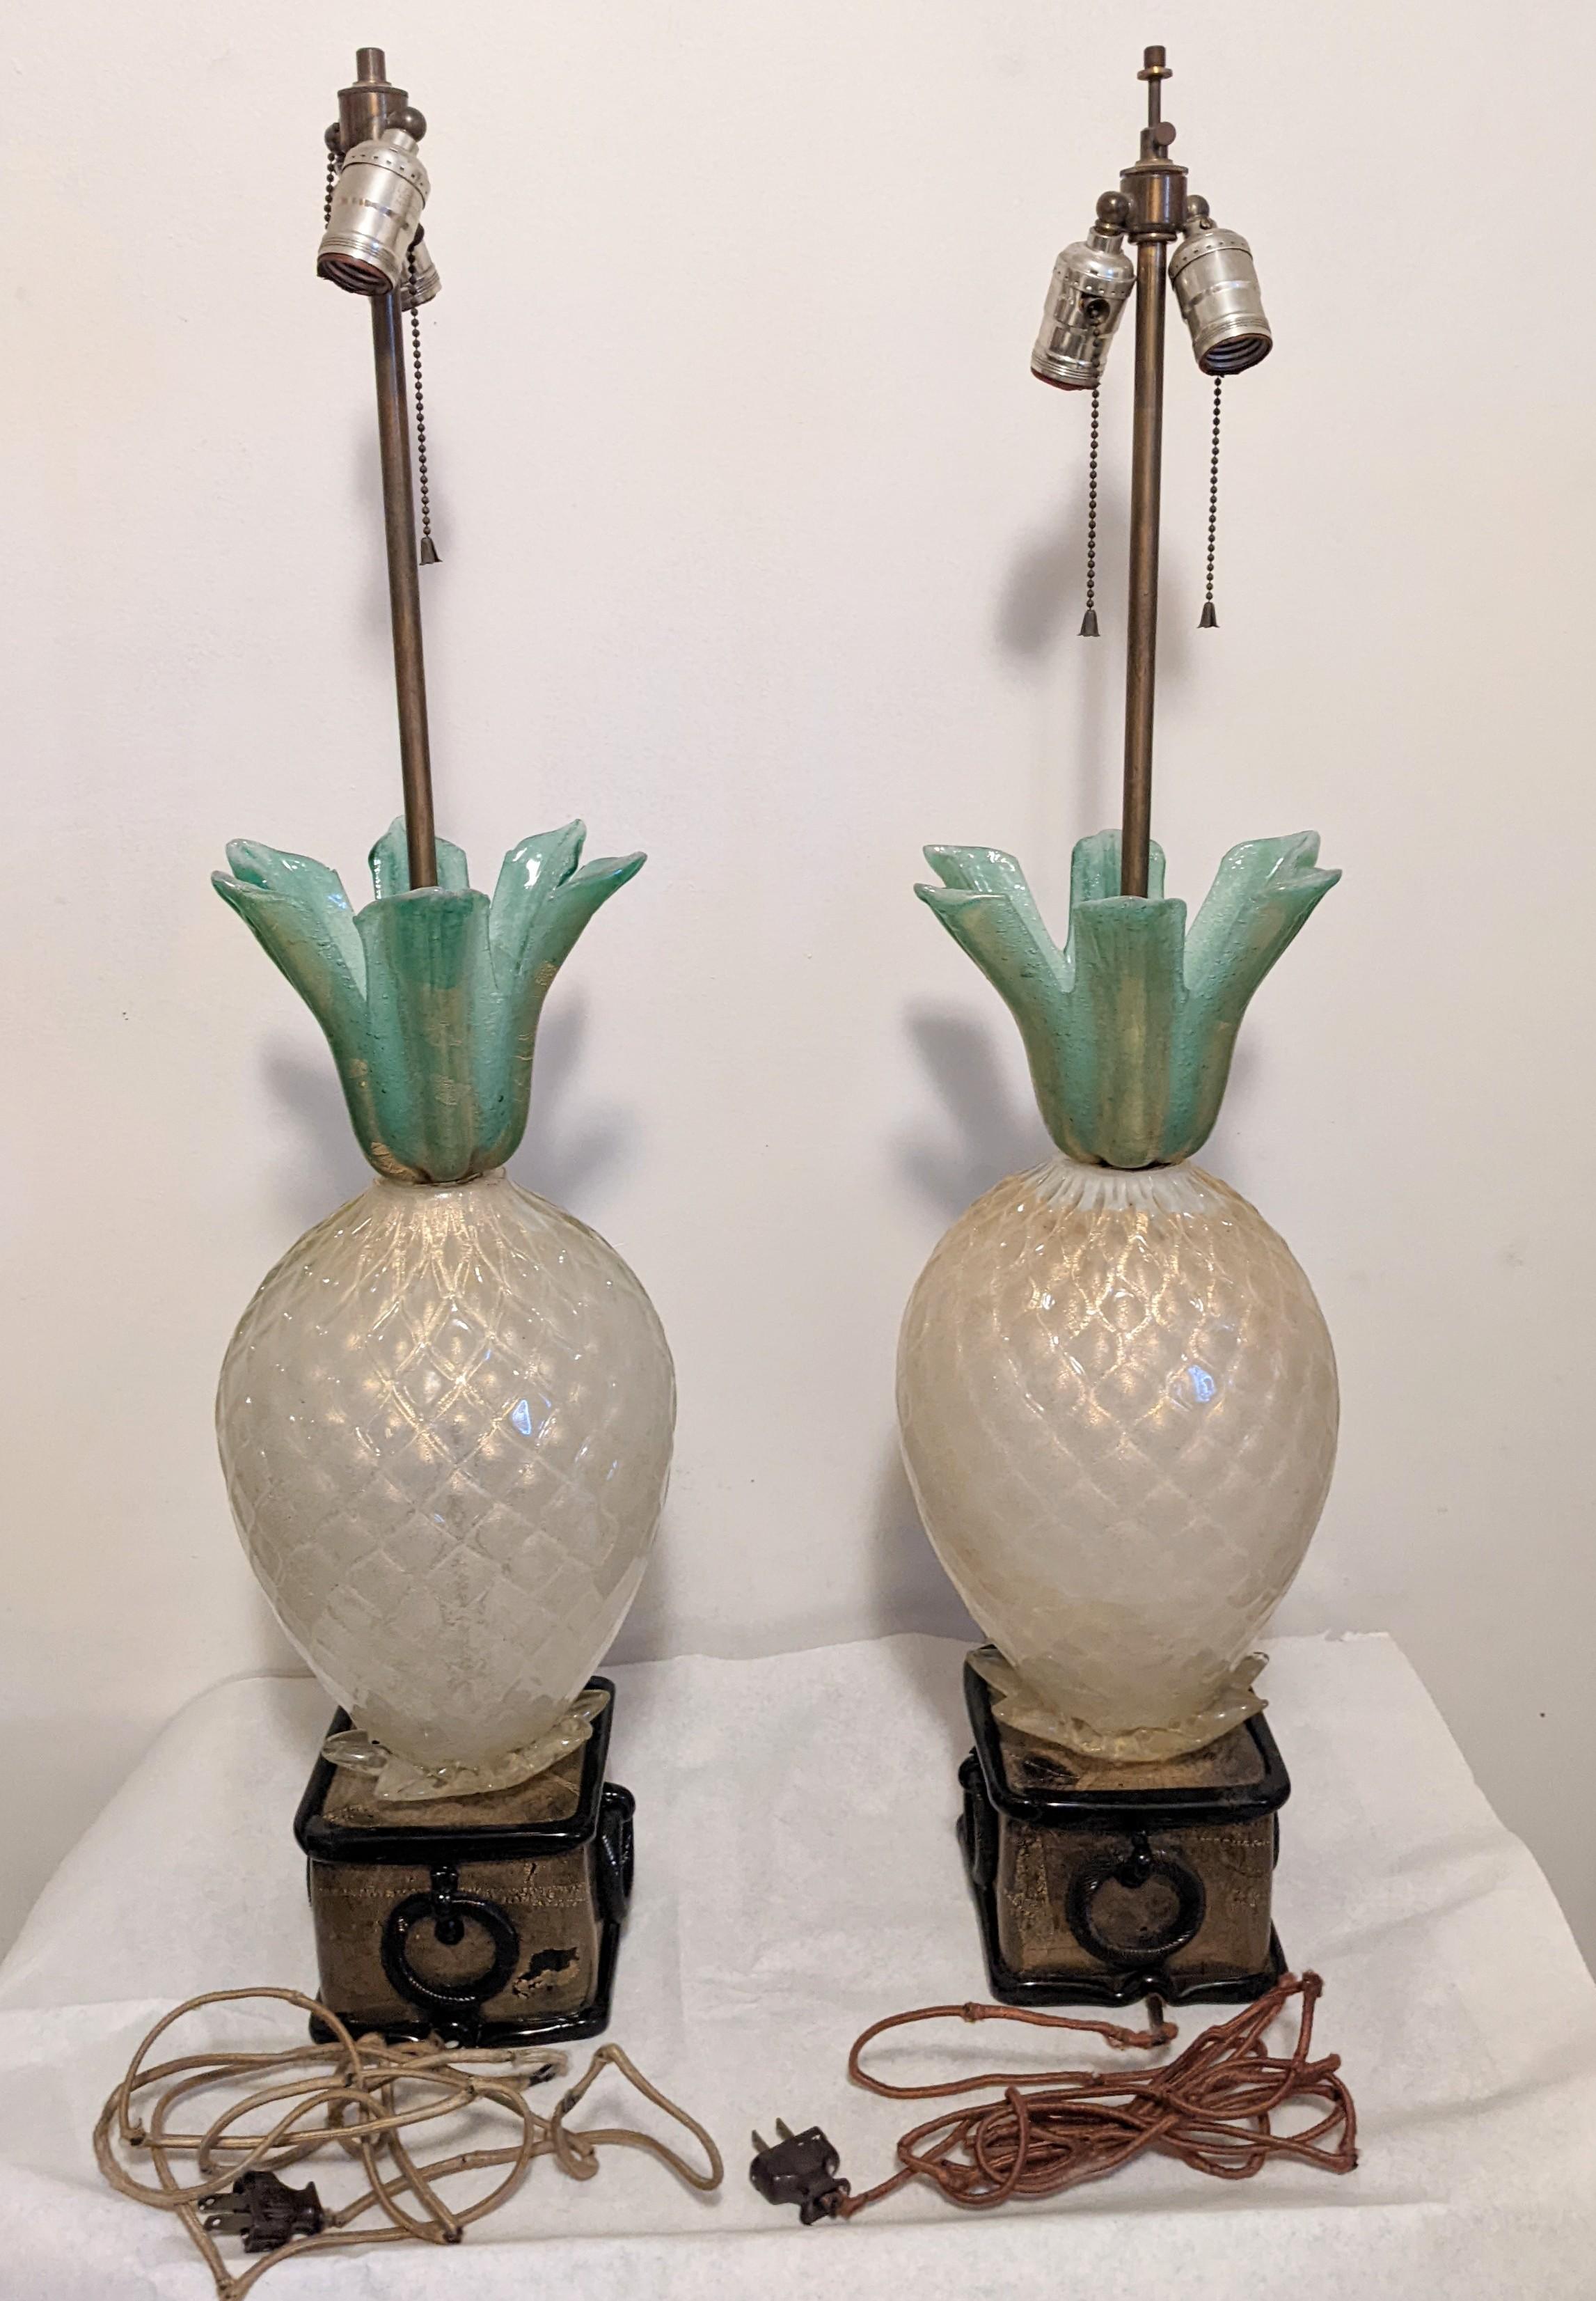 A pair of lovely and imposing Barovier Murano Pineapple form lamps from the 1930's. In period condition with original wiring and one petal broken off. The petal has a clean break and can be easily reglued. The position of the broken leaf is